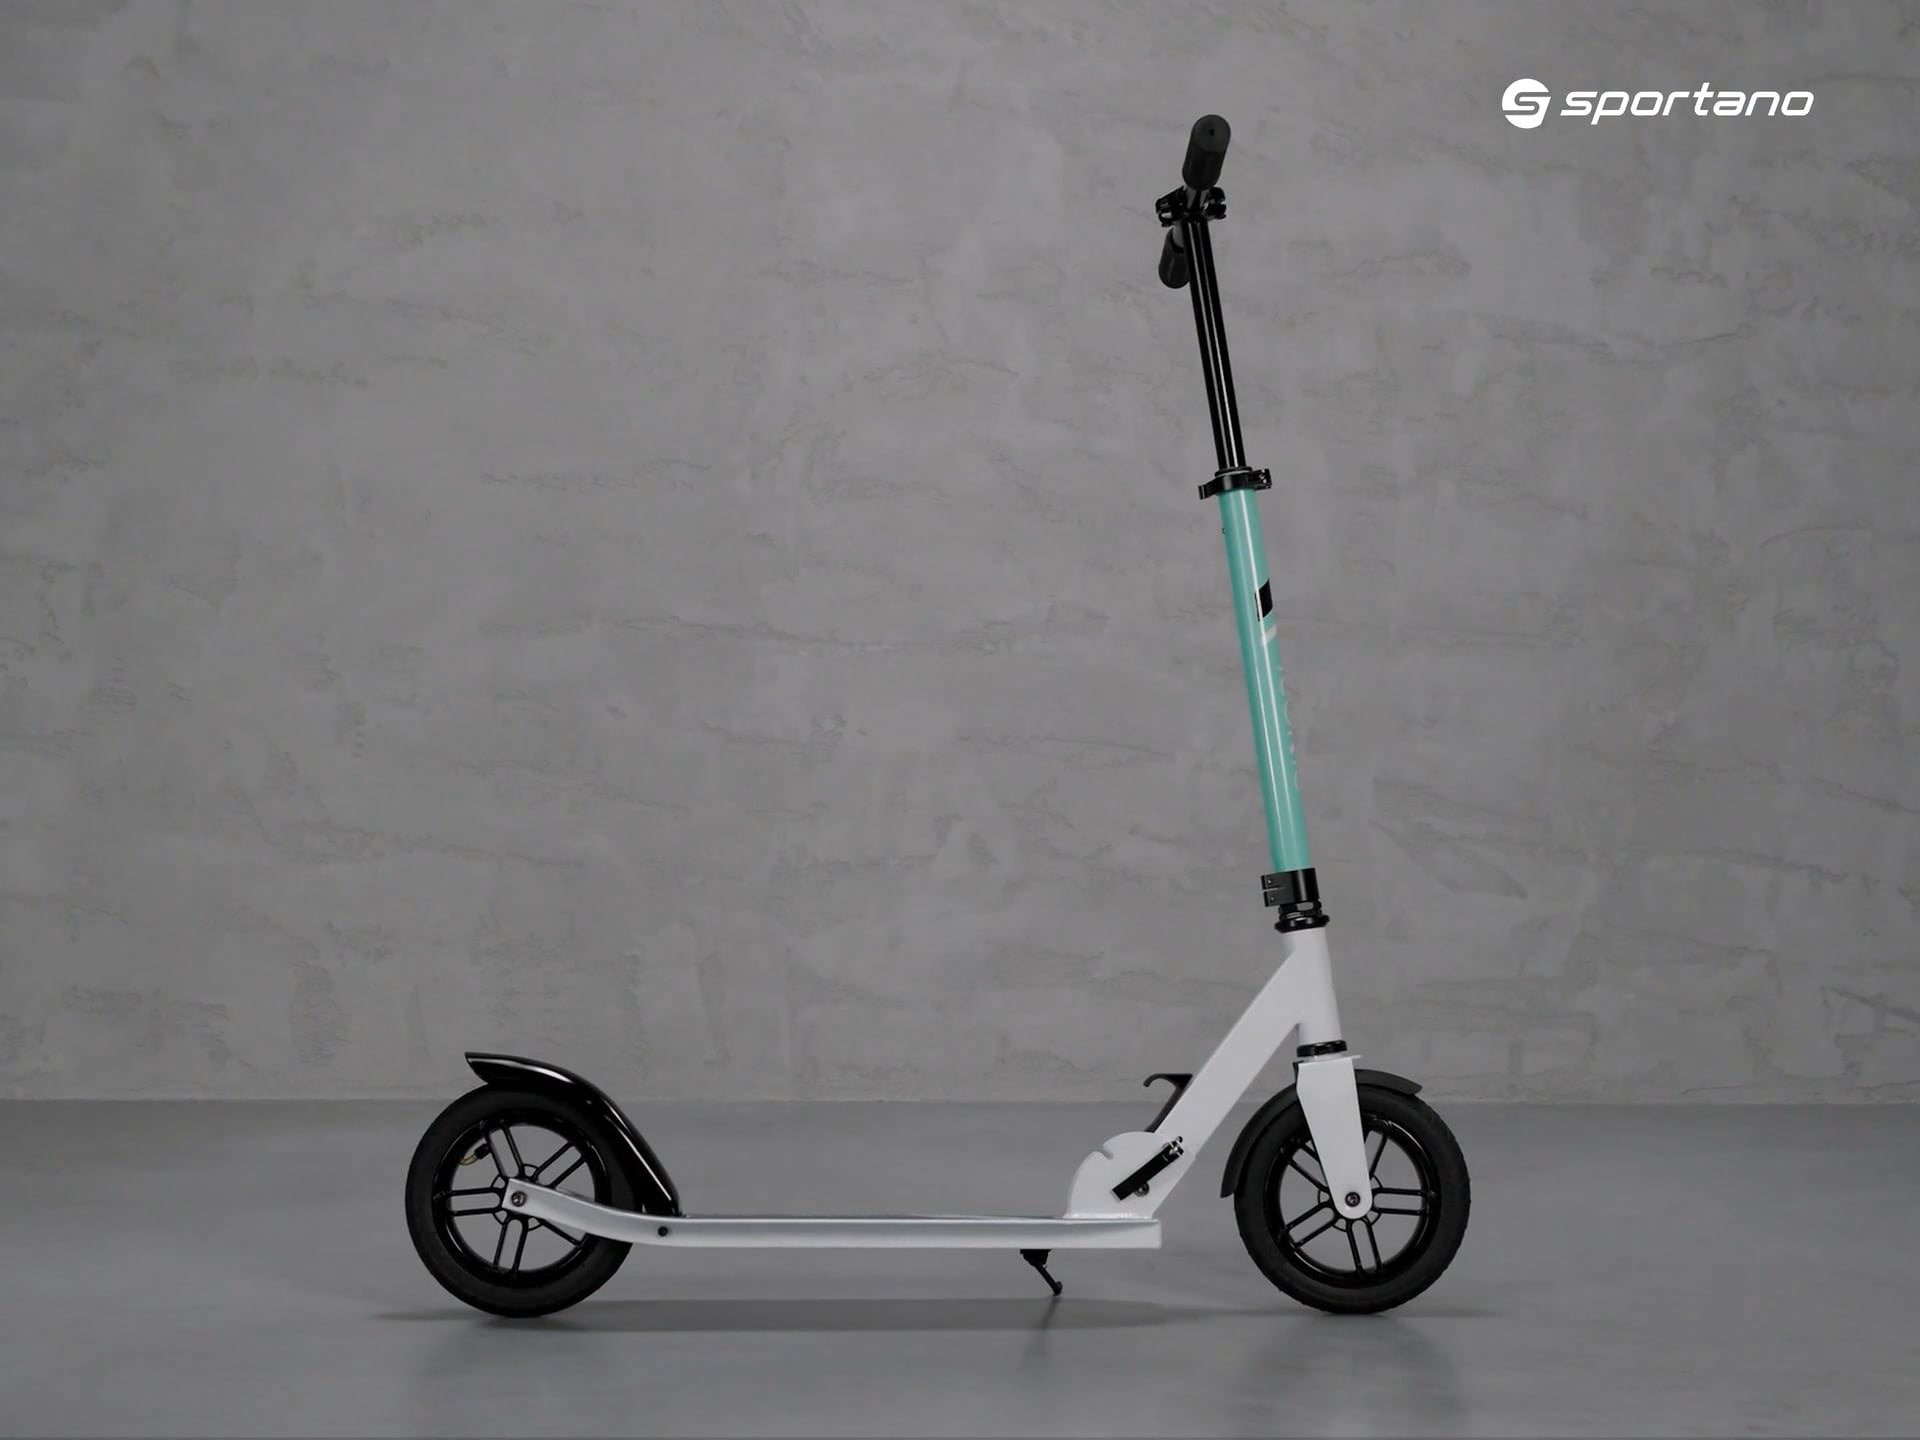 Meteor Iconic scooter λευκό και γκρι 22614